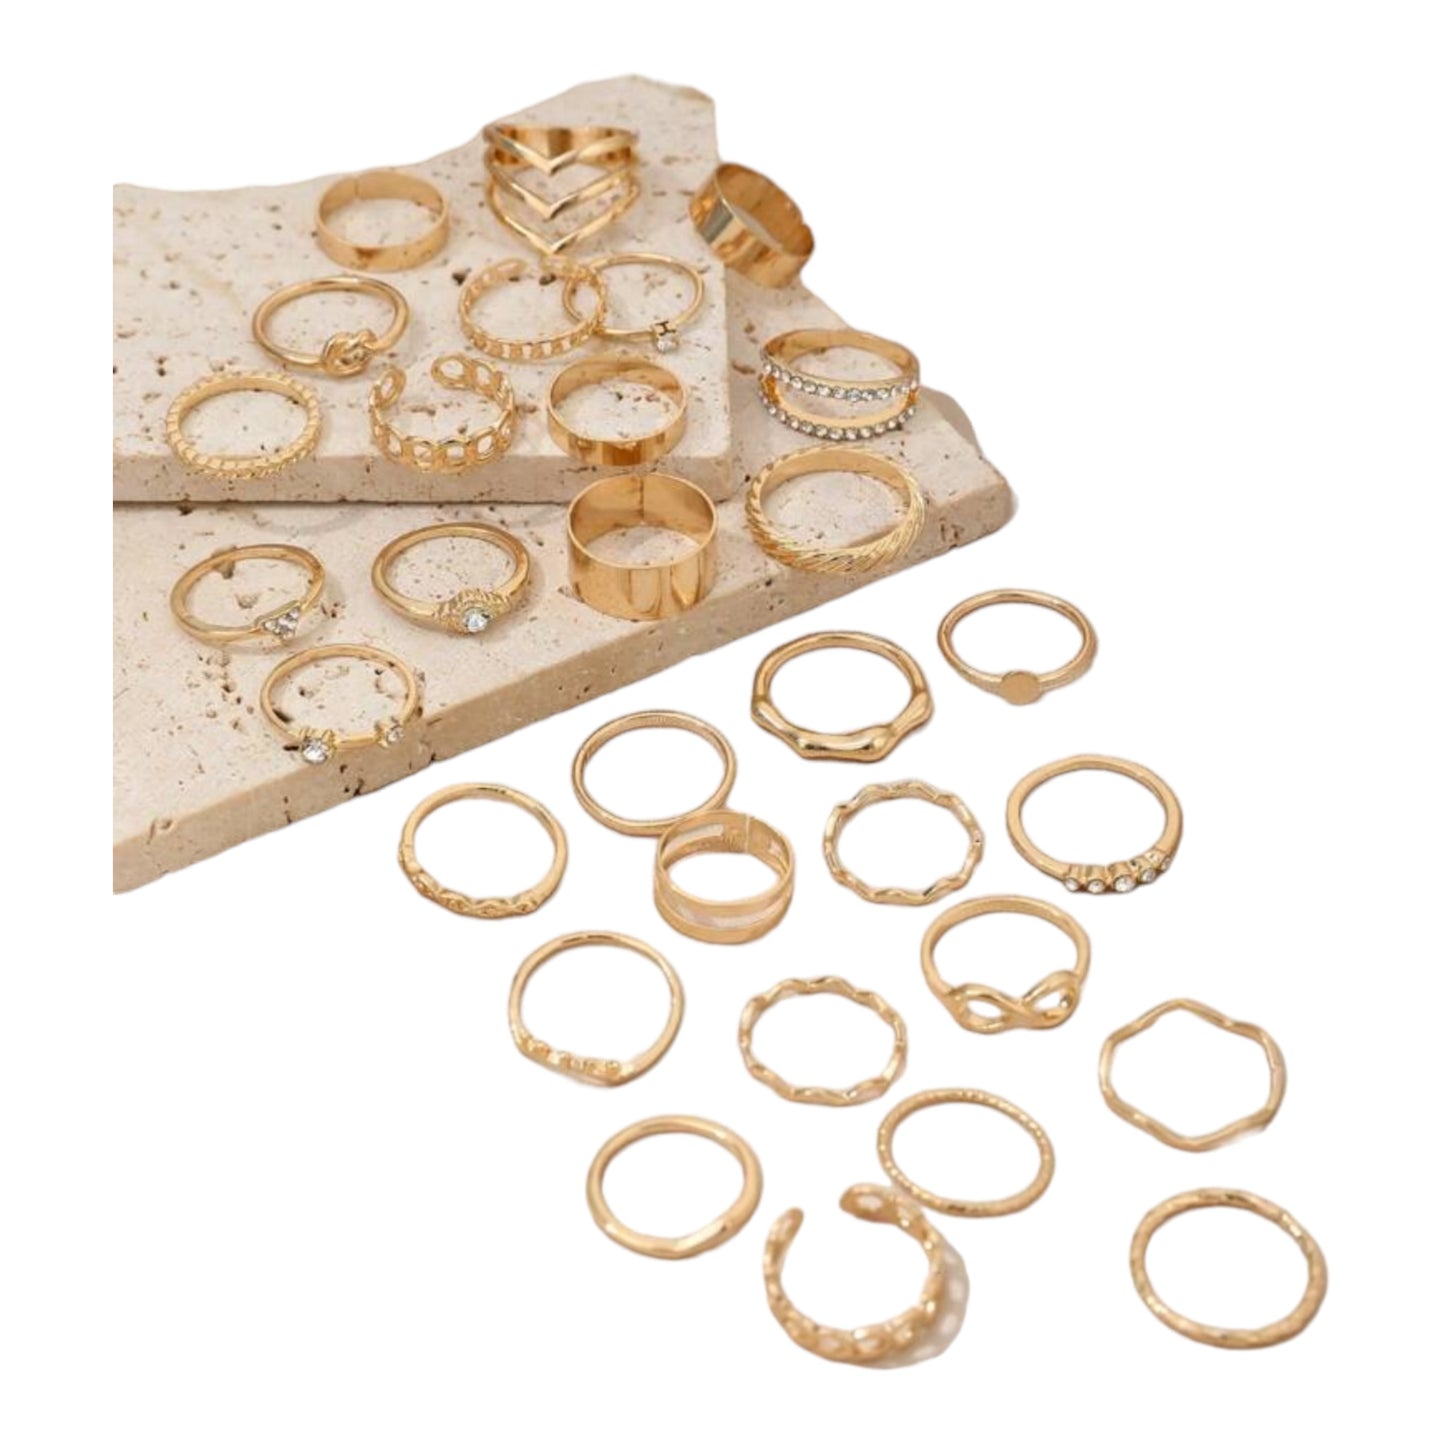 Kinky Pleasure - S019 - Ring Collection Set Gold Or Silver - 30 Pieces